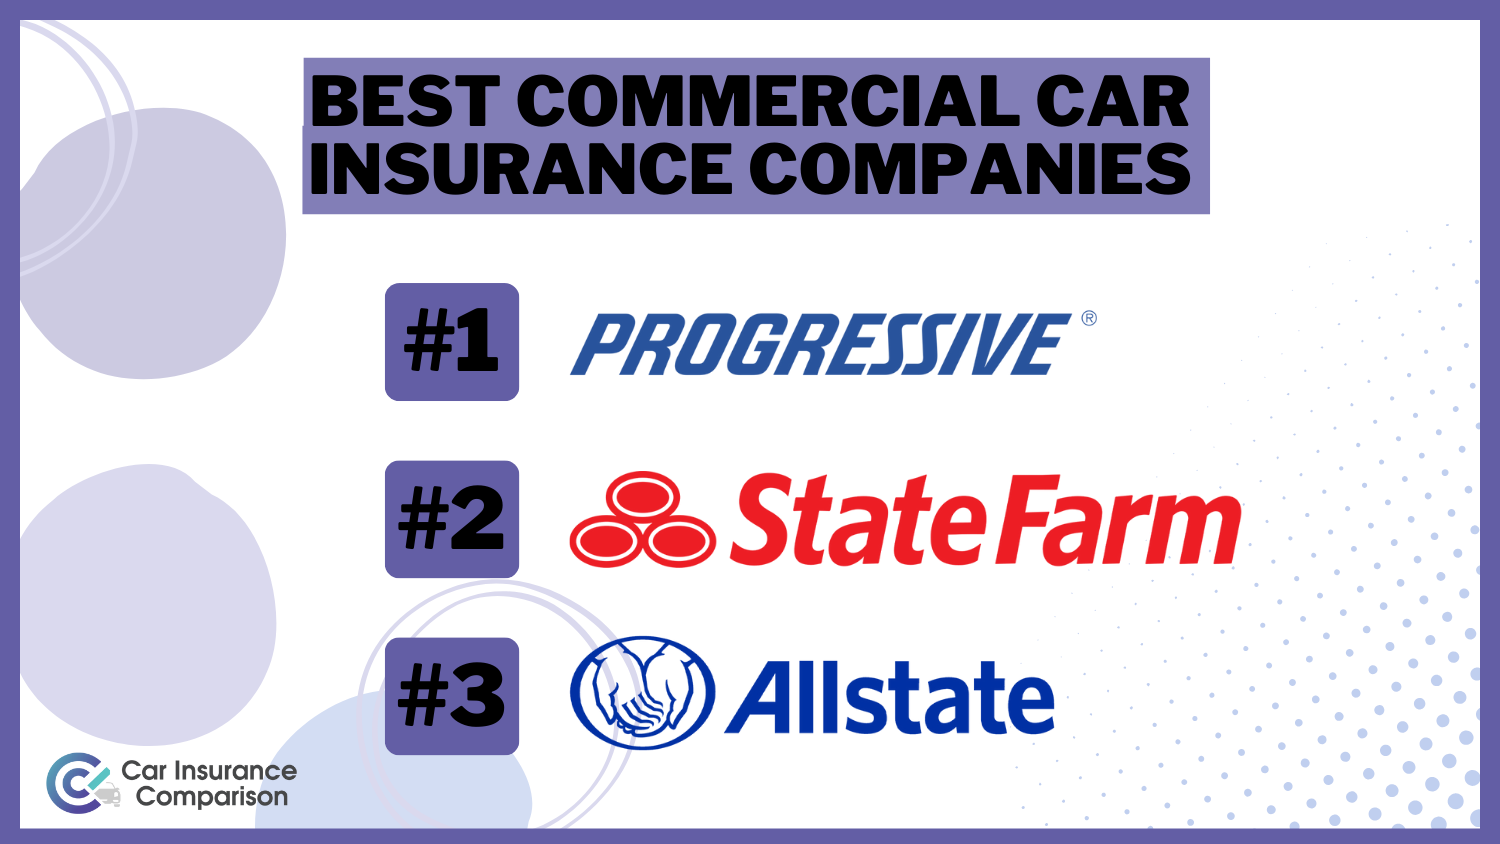 Best Commercial Car Insurance Companies: Progressive, State Farm, and Allstate.